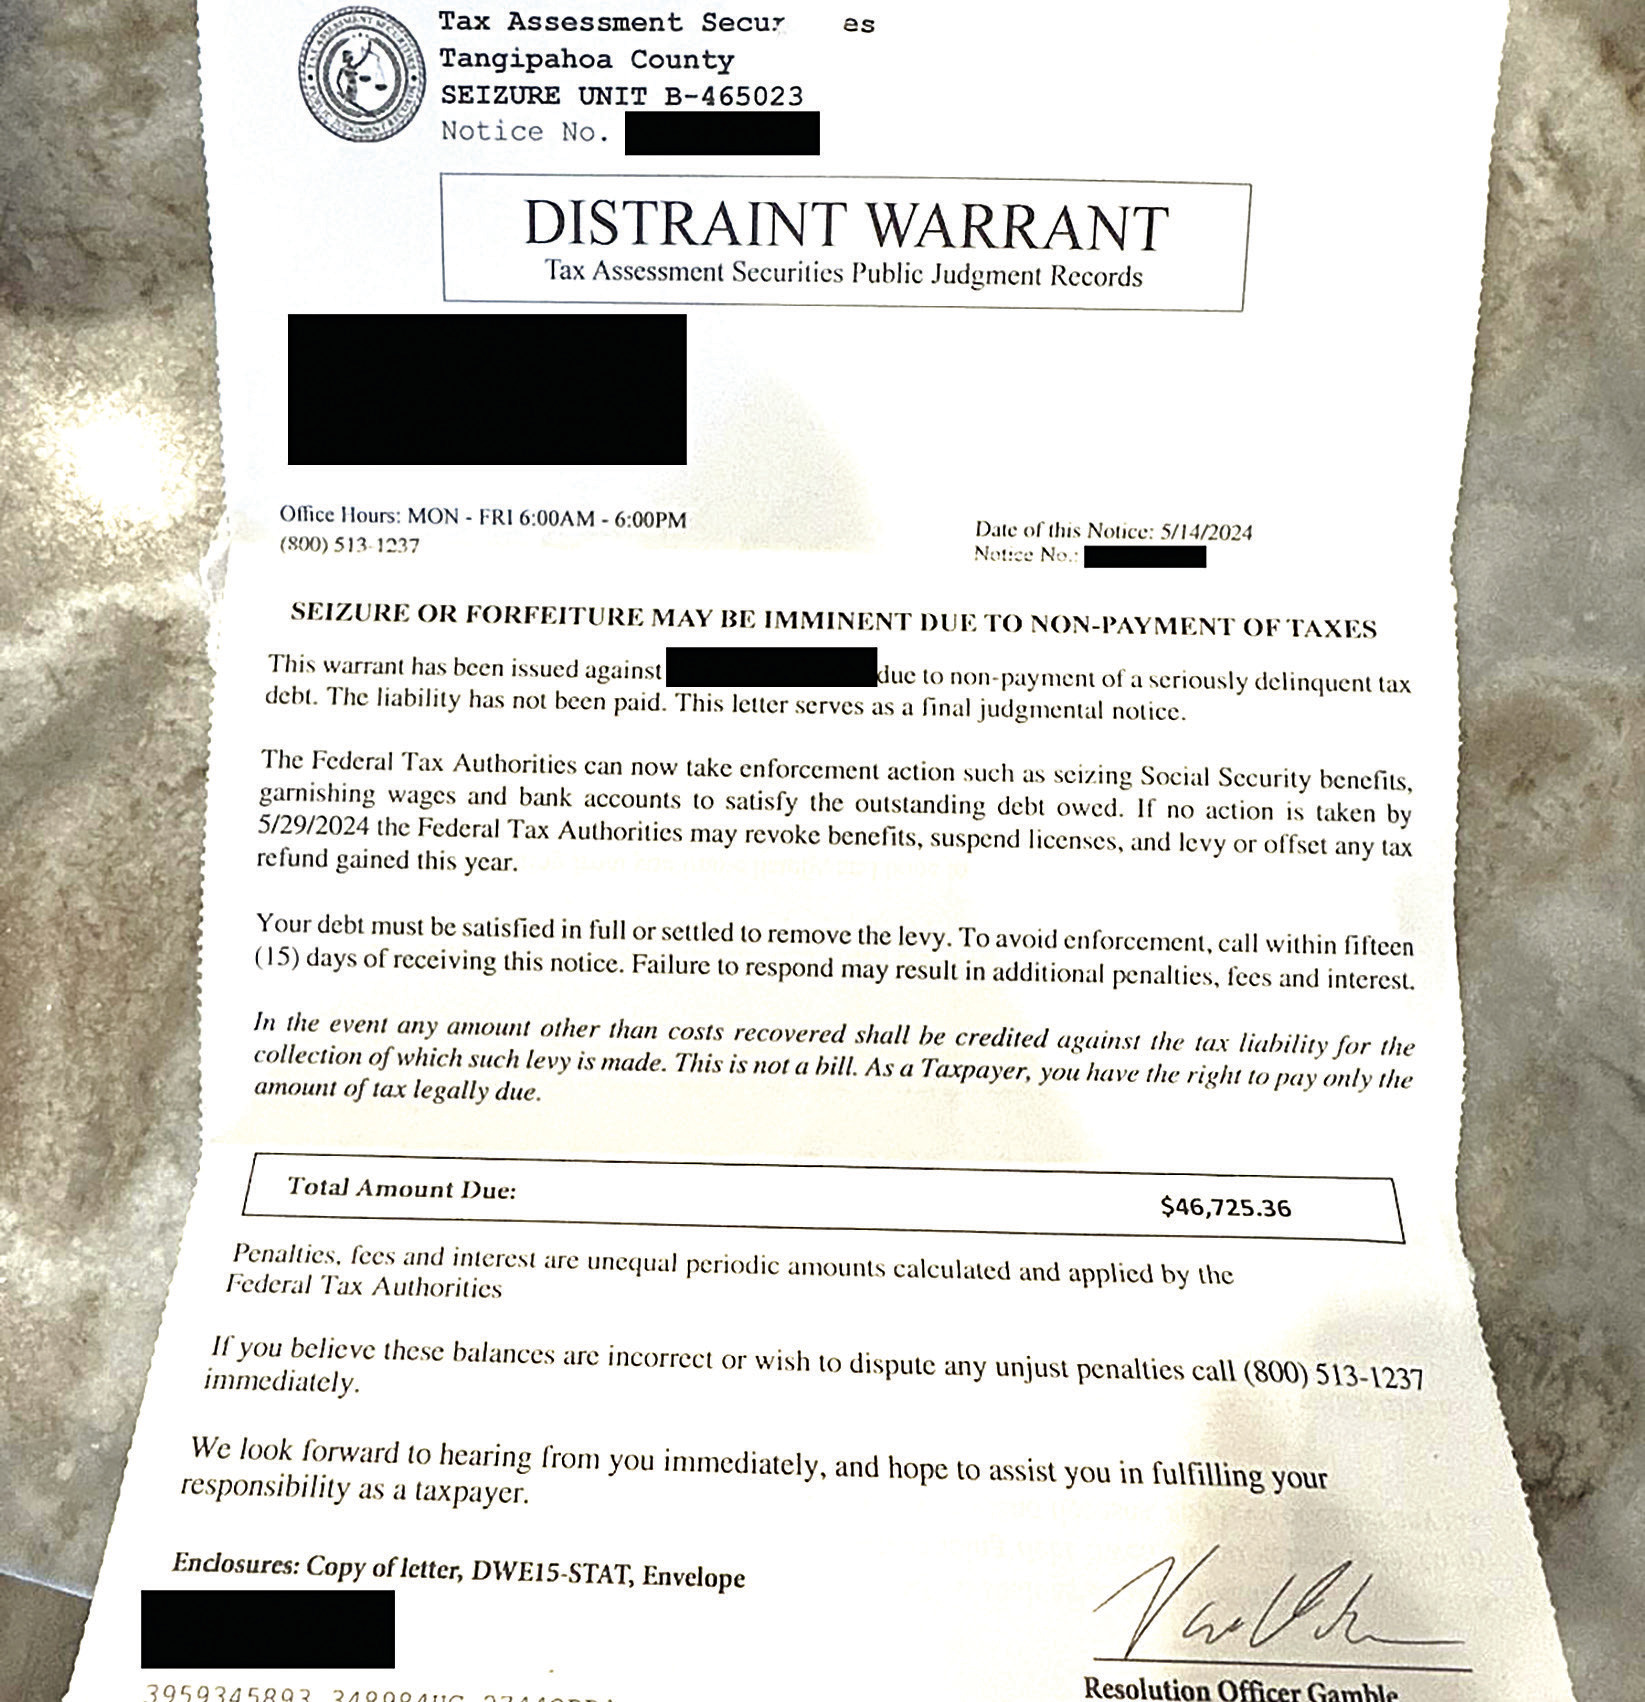 Photo of a letter received by the victim (personal information redacted)